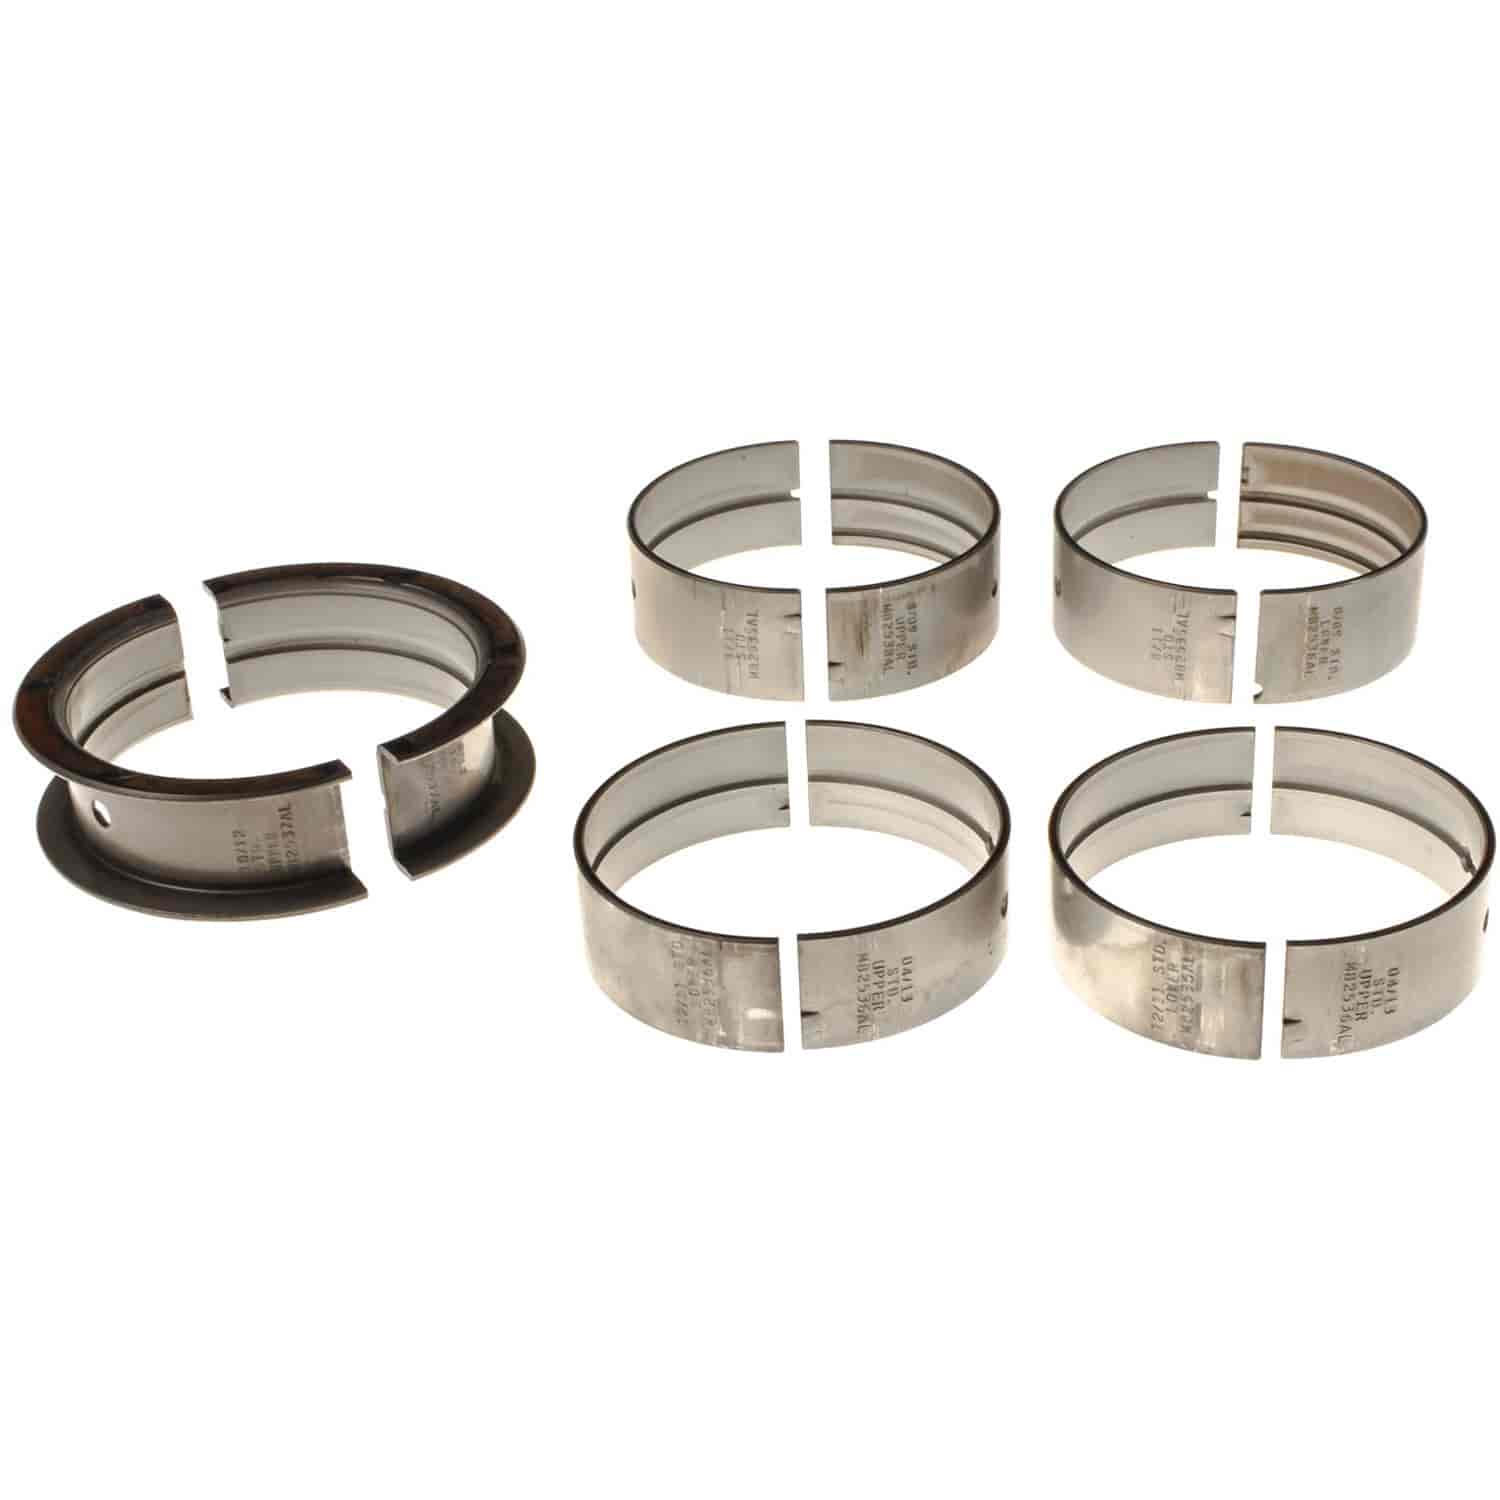 Main Bearing Set for Cadillac 1968-1984 368/425/472/500 with Standard Size